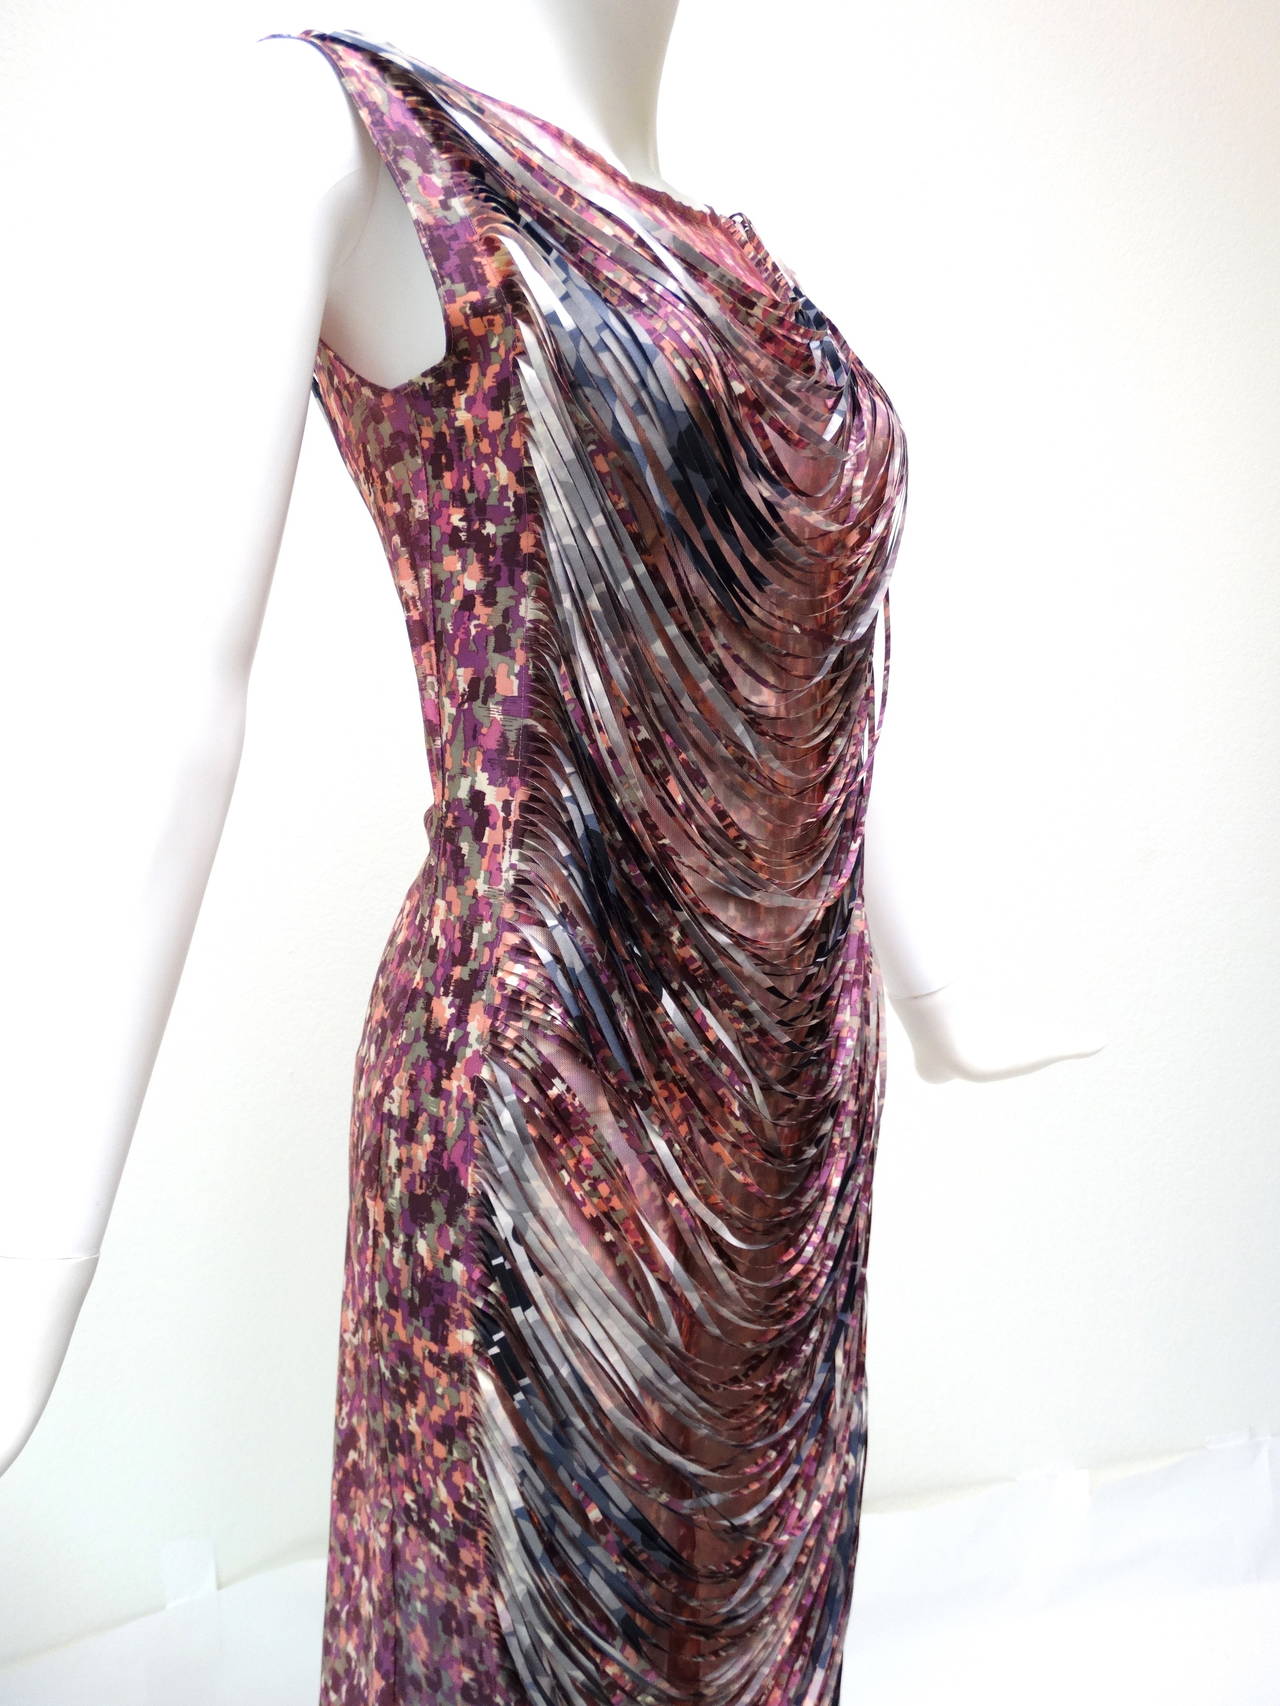 This fabulous dress is Yoshiki Hishinuma - Ready-to-Wear - Runway Collection from 2002 it has a great mosiac print in pinks, grays and white and is completely sheer in the front covered by draping shredded facbric in the same print and reinforced on